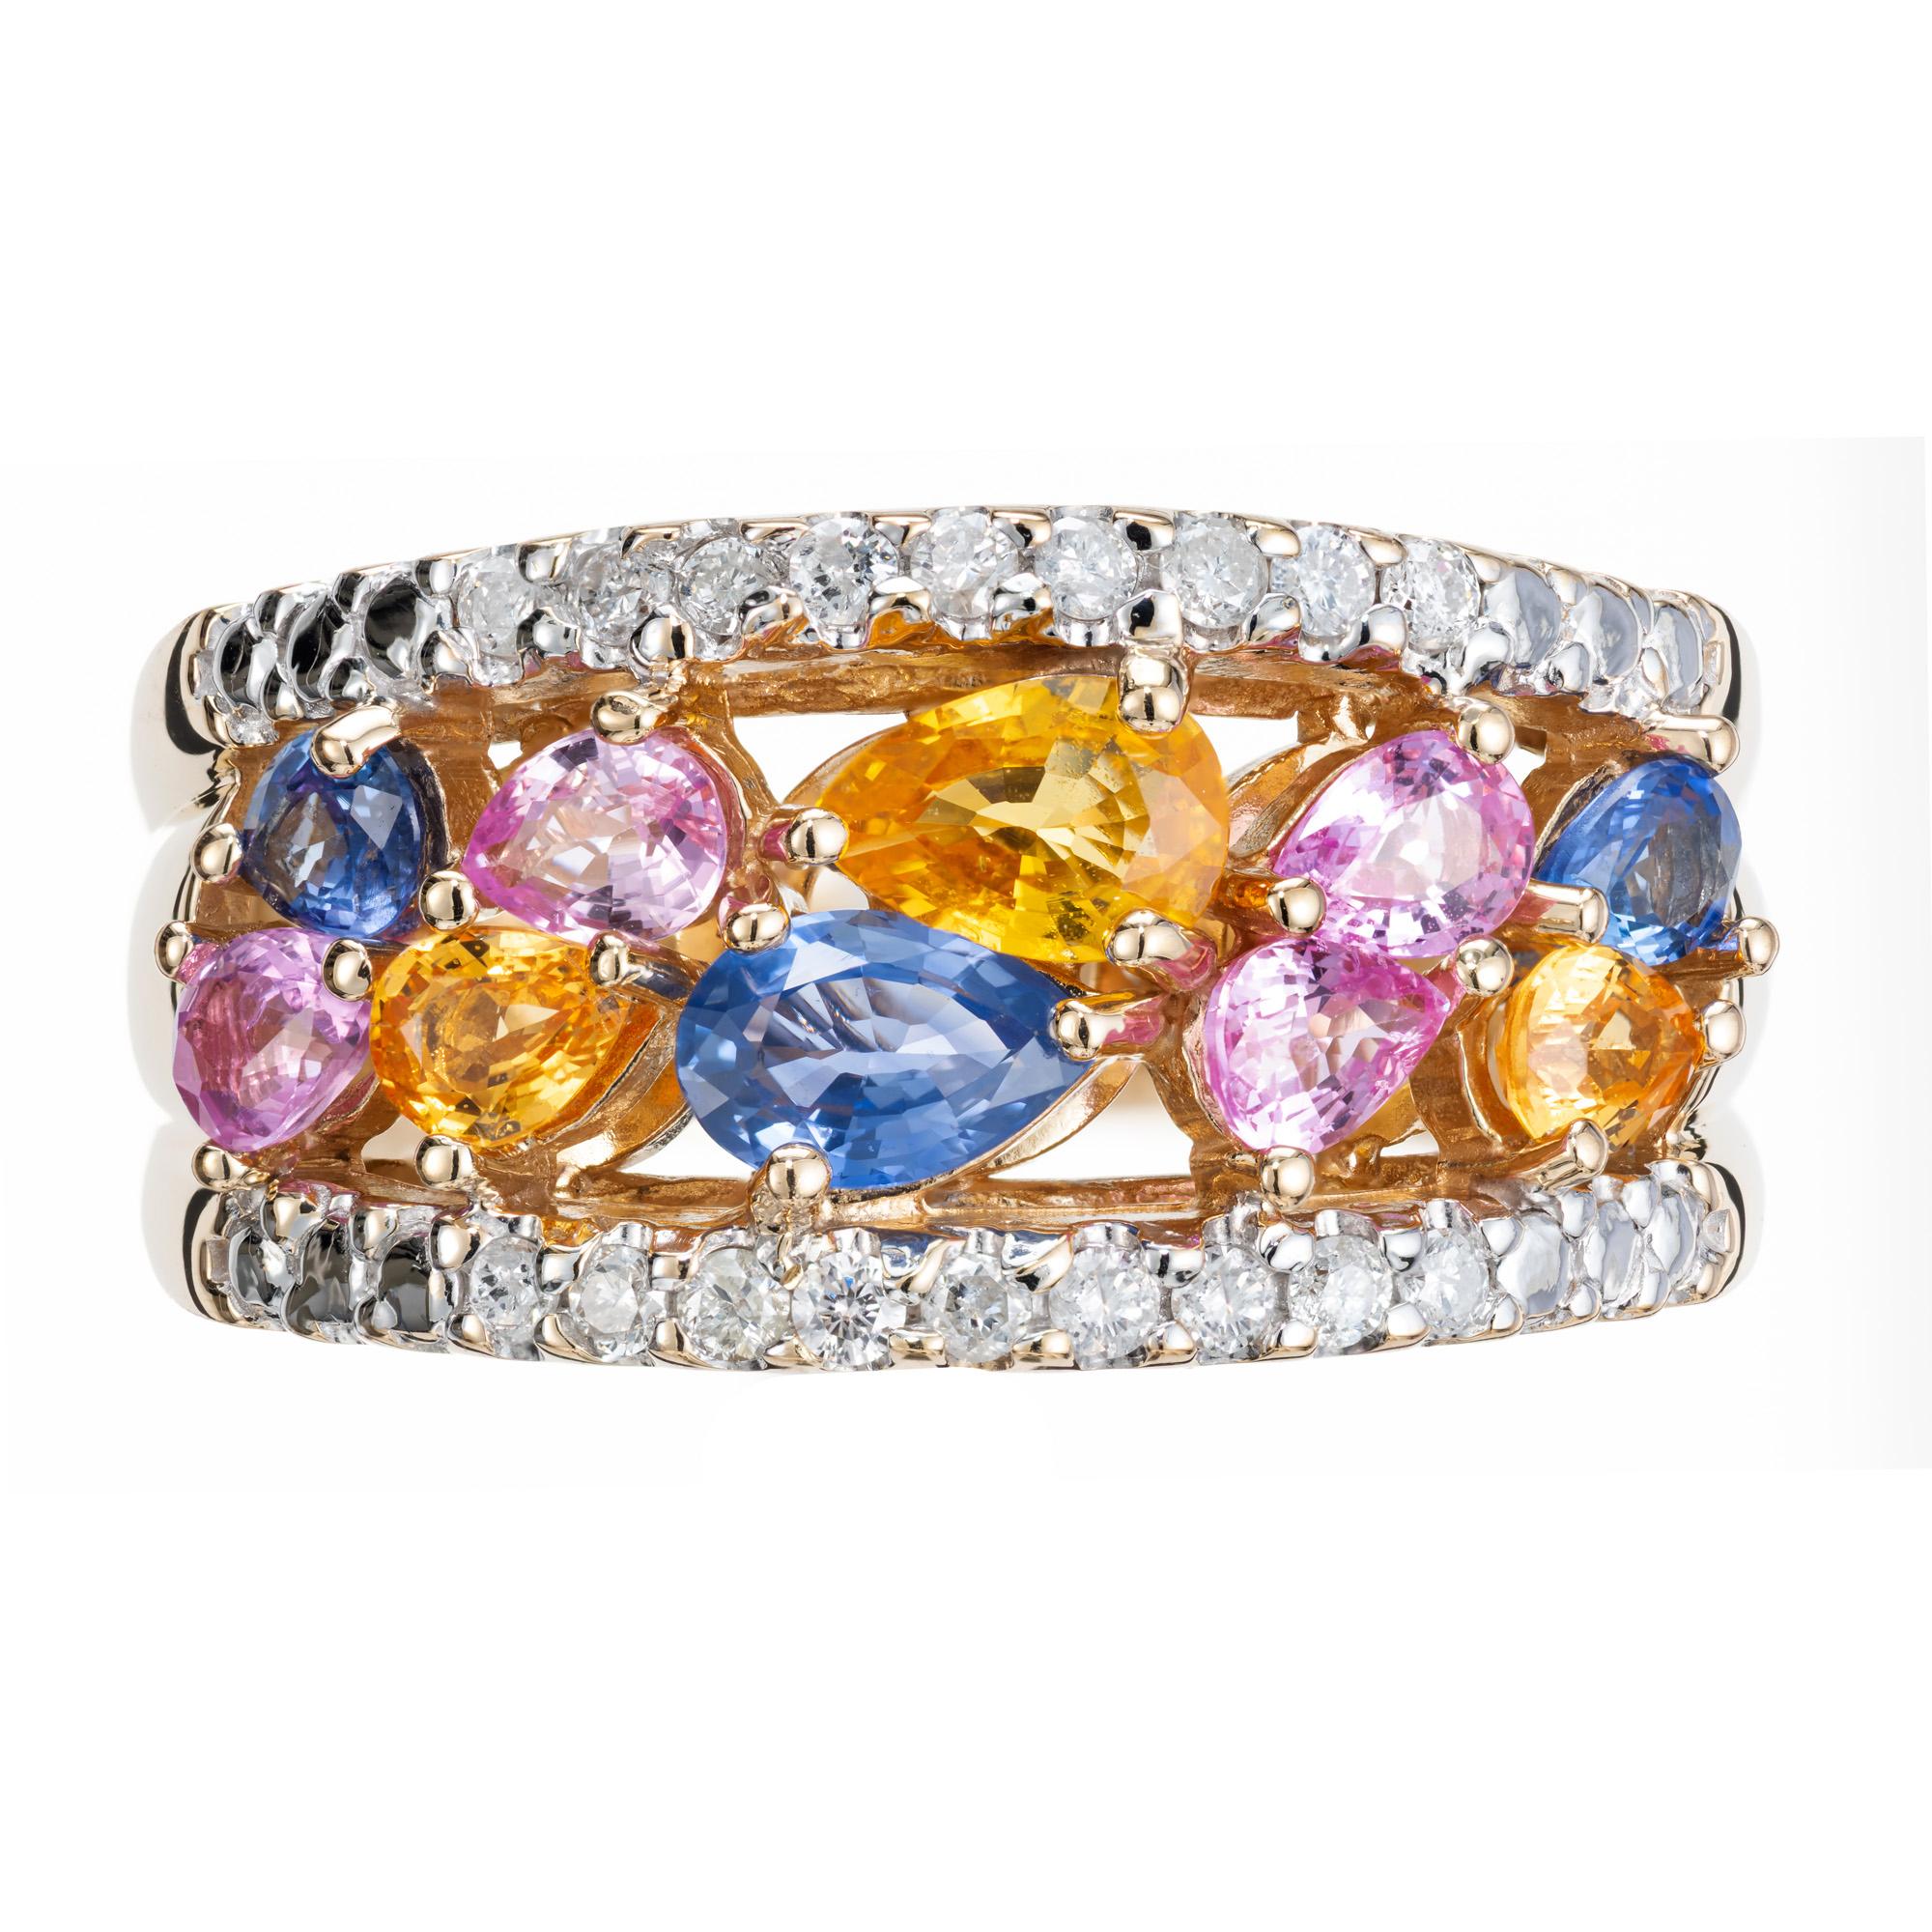 Dazzling multi color sapphire and diamond band ring. 10 mixed colored blue, yellow and pink pear shaped sapphires set in a 14k yellow gold open work setting. Framed with two rows of 18 full cut round white diamonds. 

18 full cut diamonds approx.